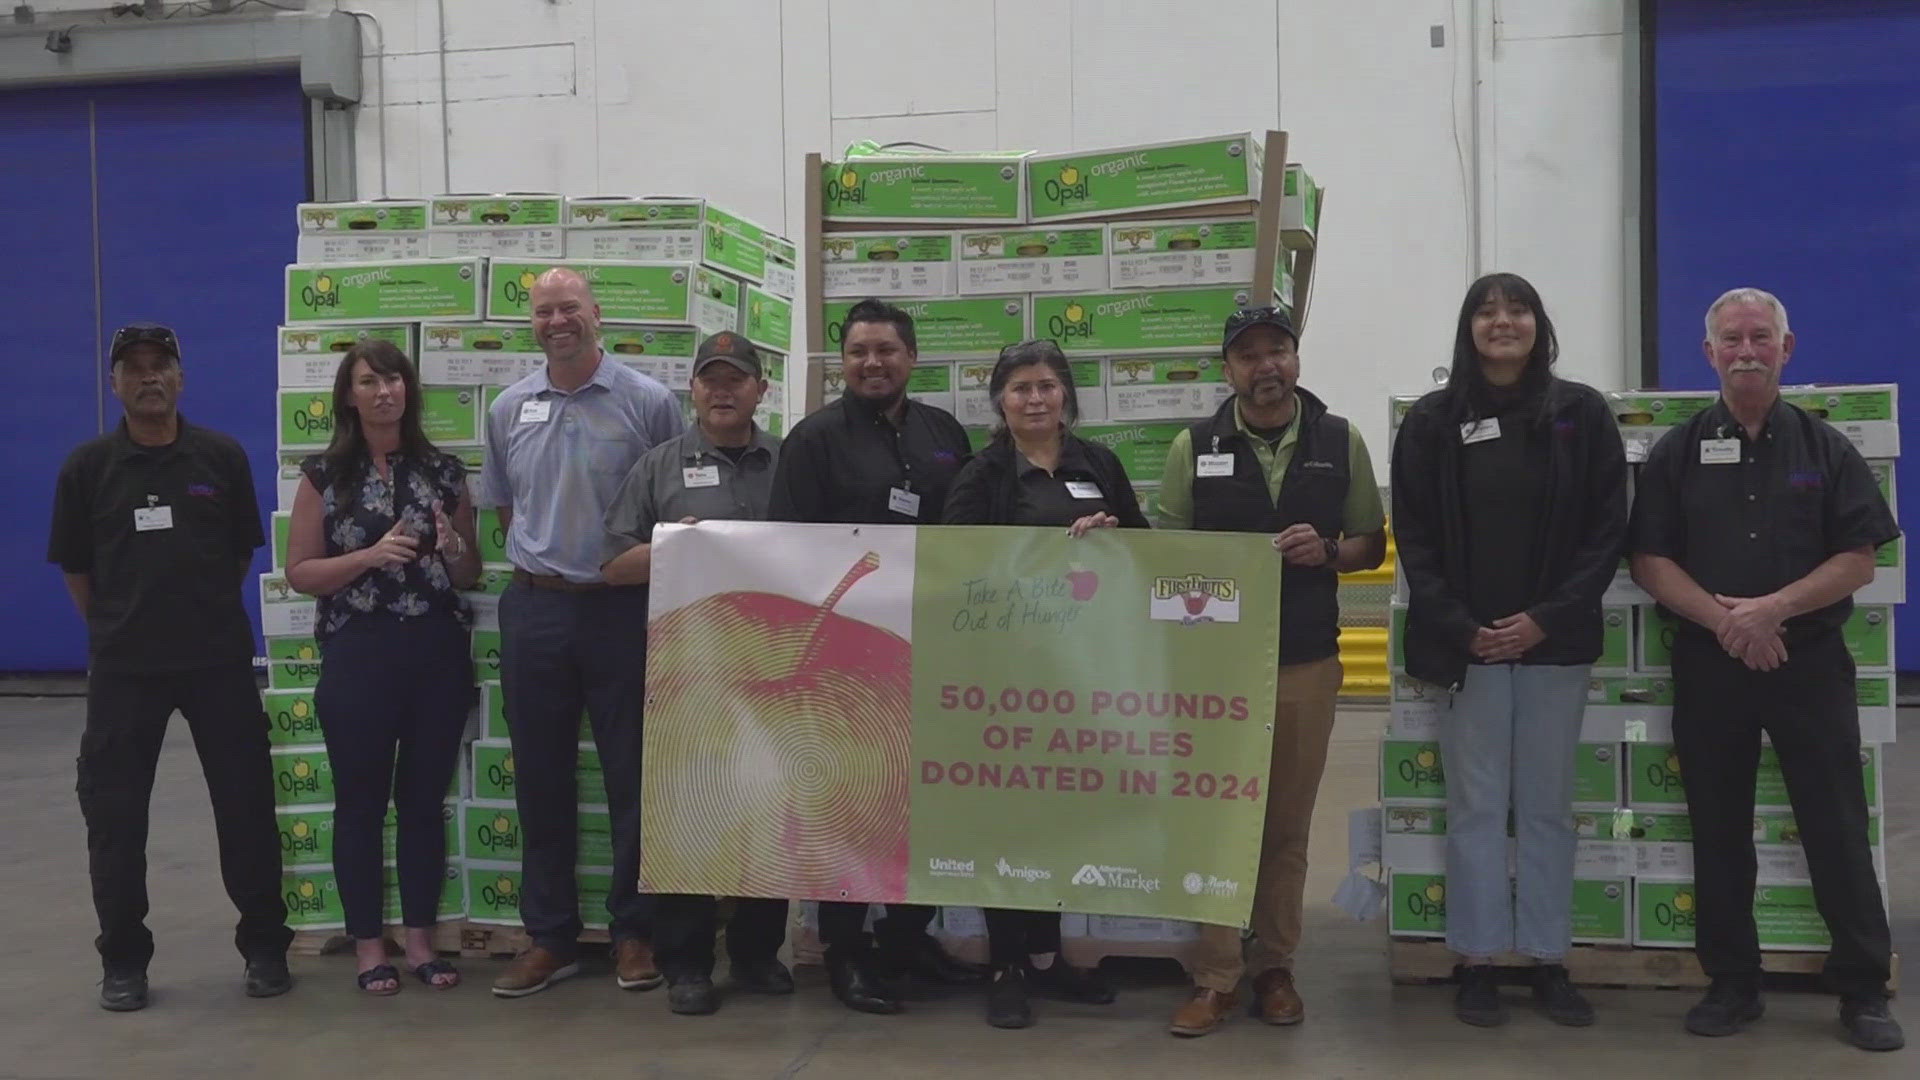 United Supermarkets and Market Street donated 50,000 pounds of apples to WTFB. The apples will be distributed throughout all 19 counties that the food bank serves.